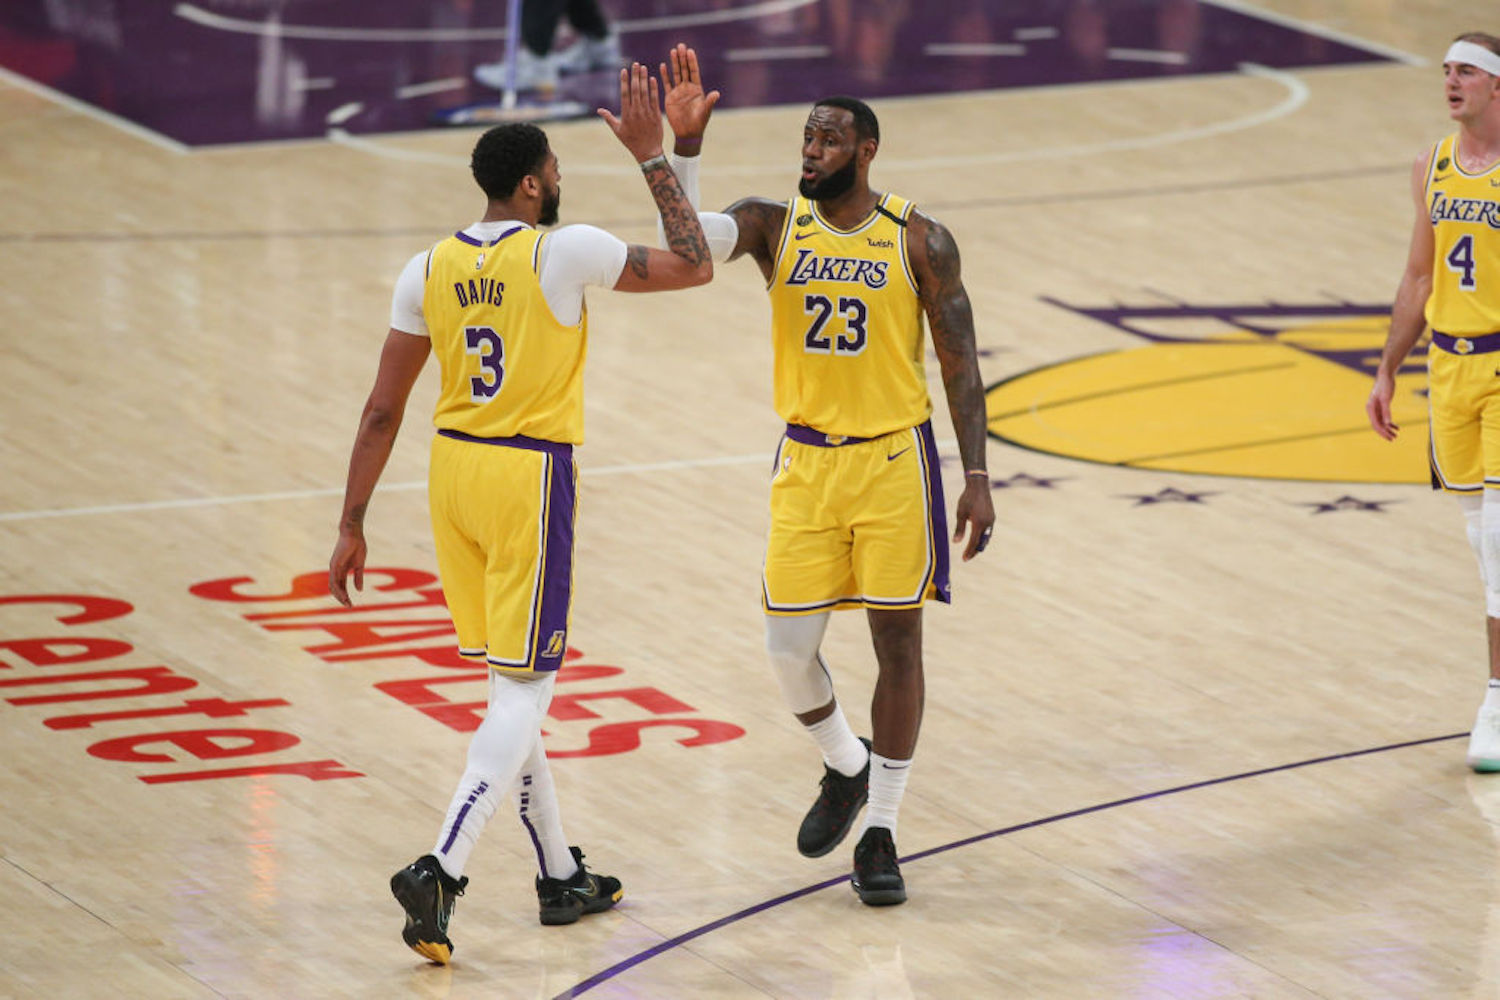 LeBron James has been considered the best player on every team he's played for, but he just passed the torch to a teammate for the first time.